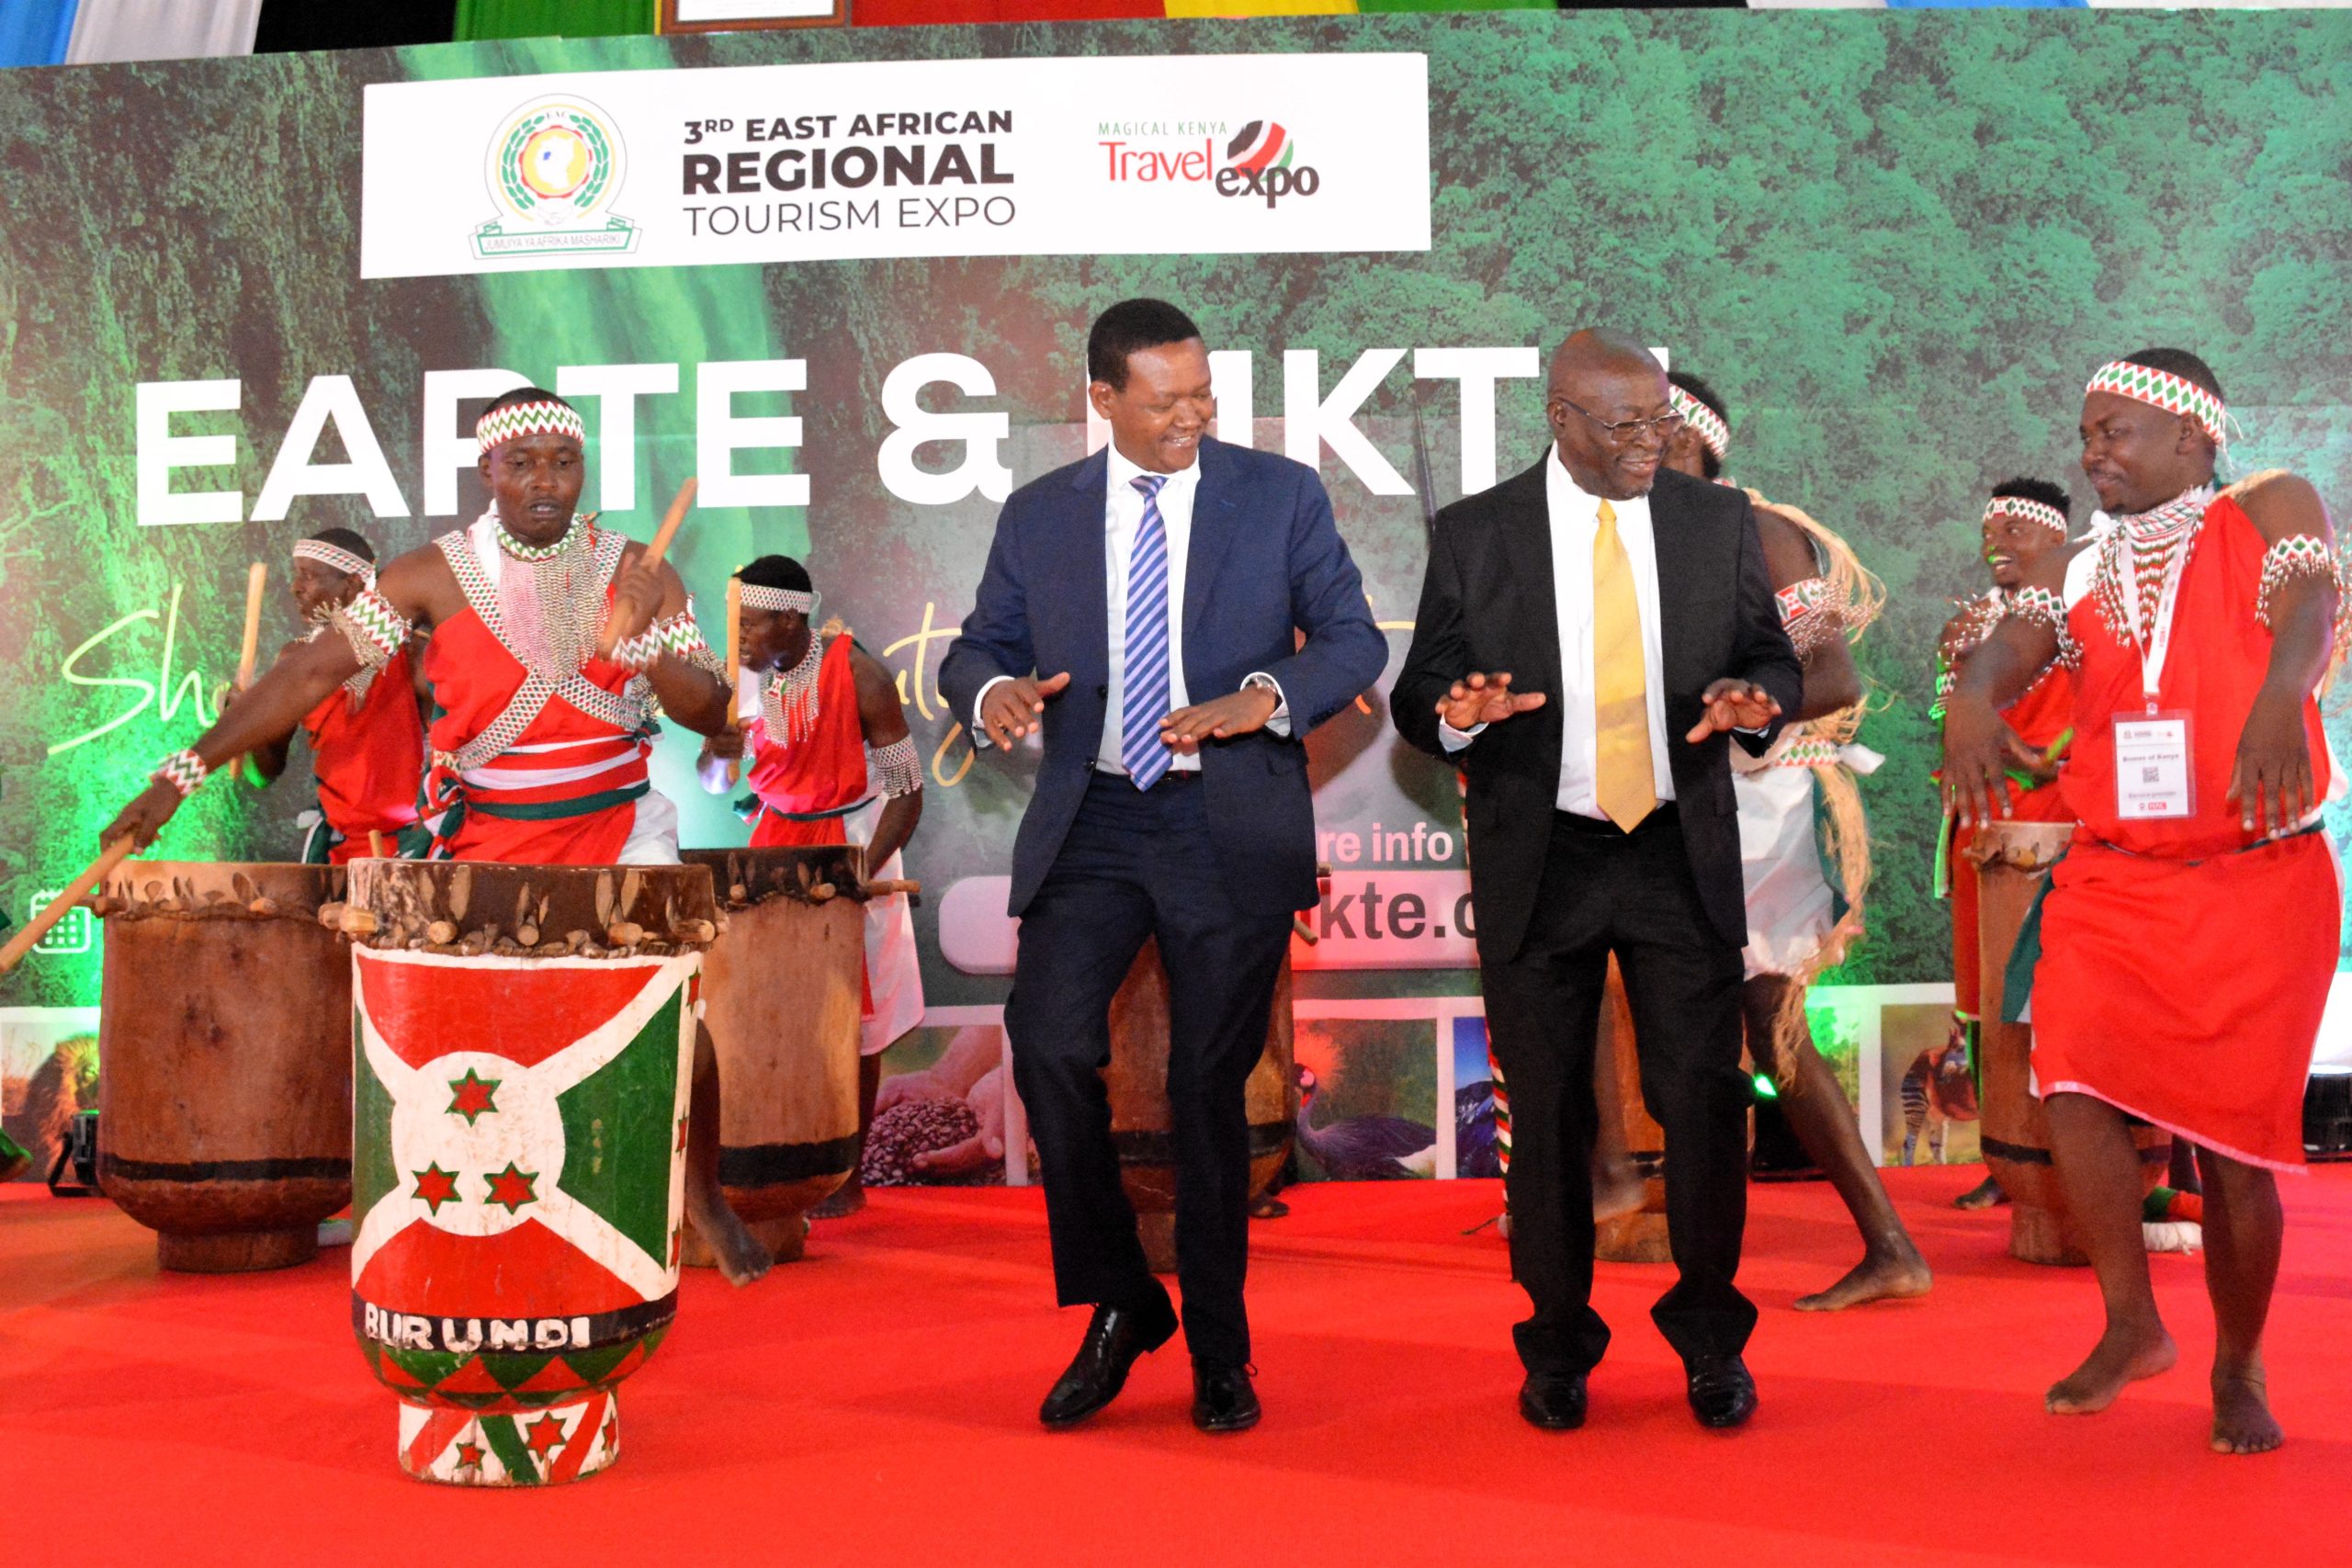 The Cabinet Secretary for Tourism and Wildlife-Kenya, Dr. Alfred Mutua (navy blue suit), is joined by South Africa's Deputy Minister for Tourism, Amos Fish (black suit), in dancing during the closing ceremony of the 3rd East African Regional Tourism Expo and the 12th Magical Kenya Travel Expo, today, at the Kenyatta International Convention Centre.